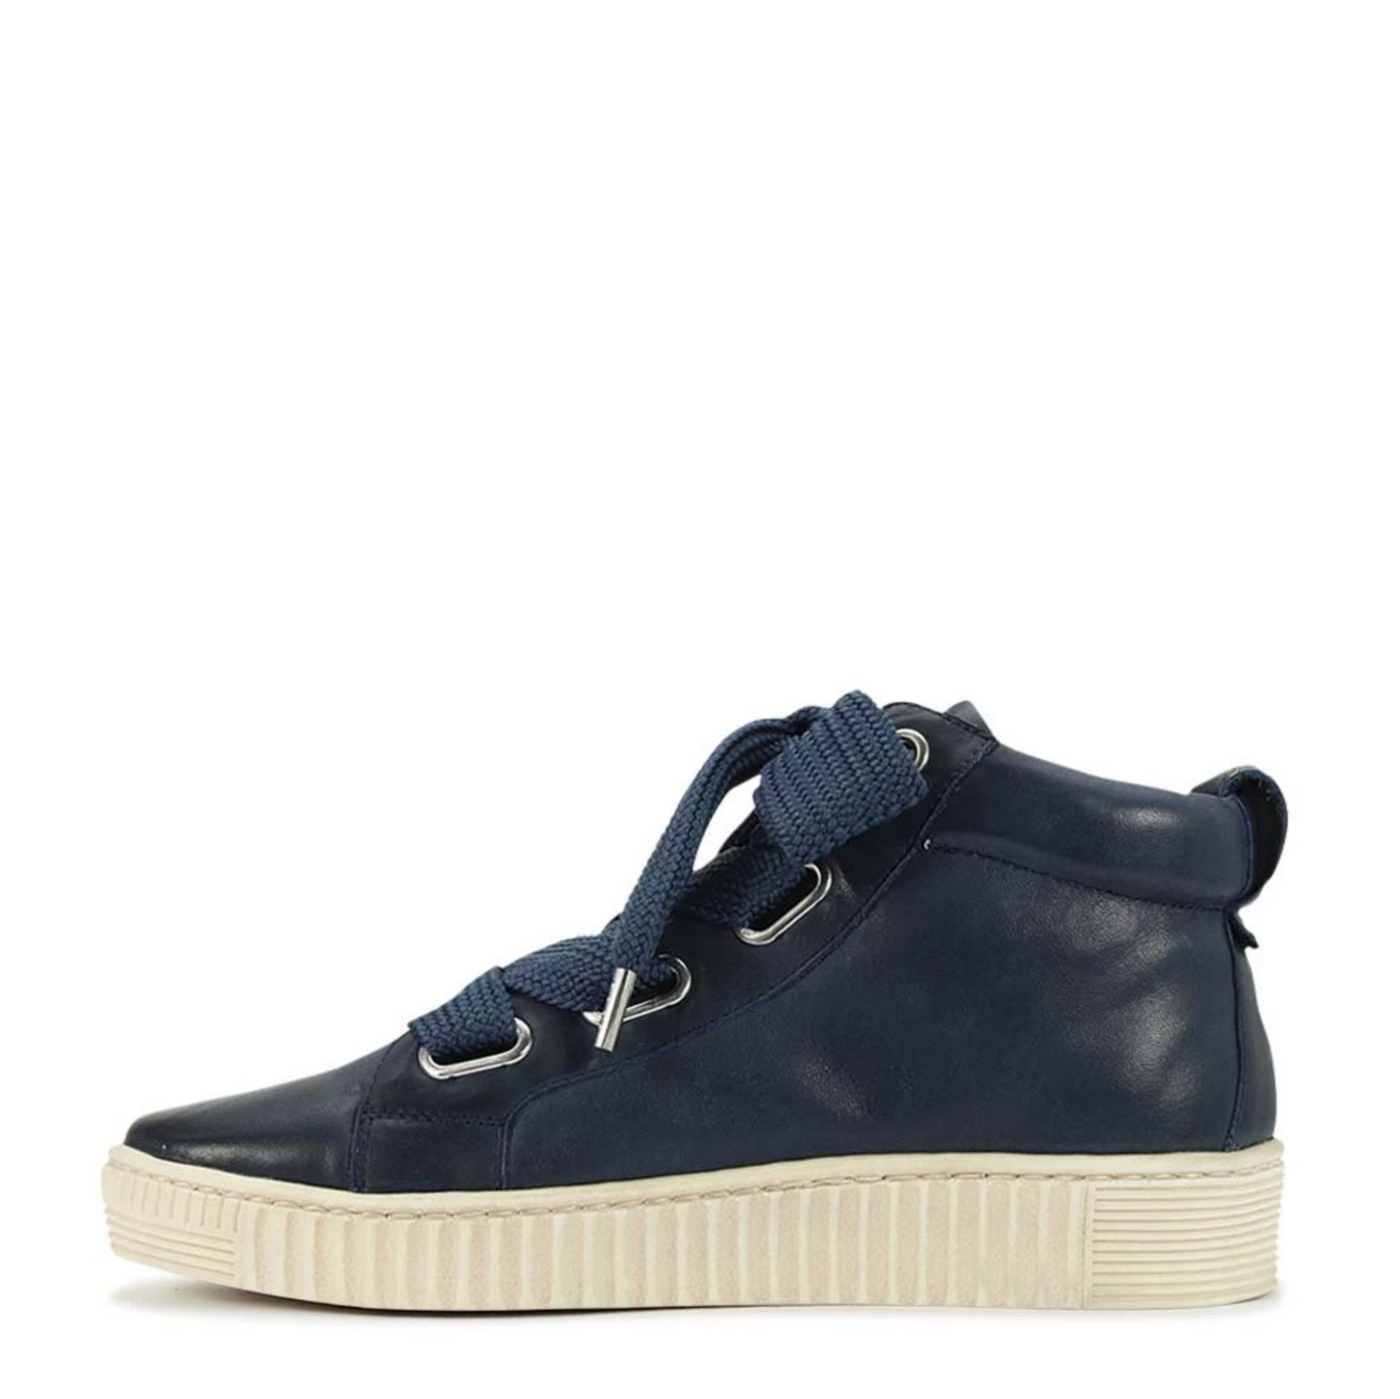 EOS JOYOUS NAVY - Collective Shoes 